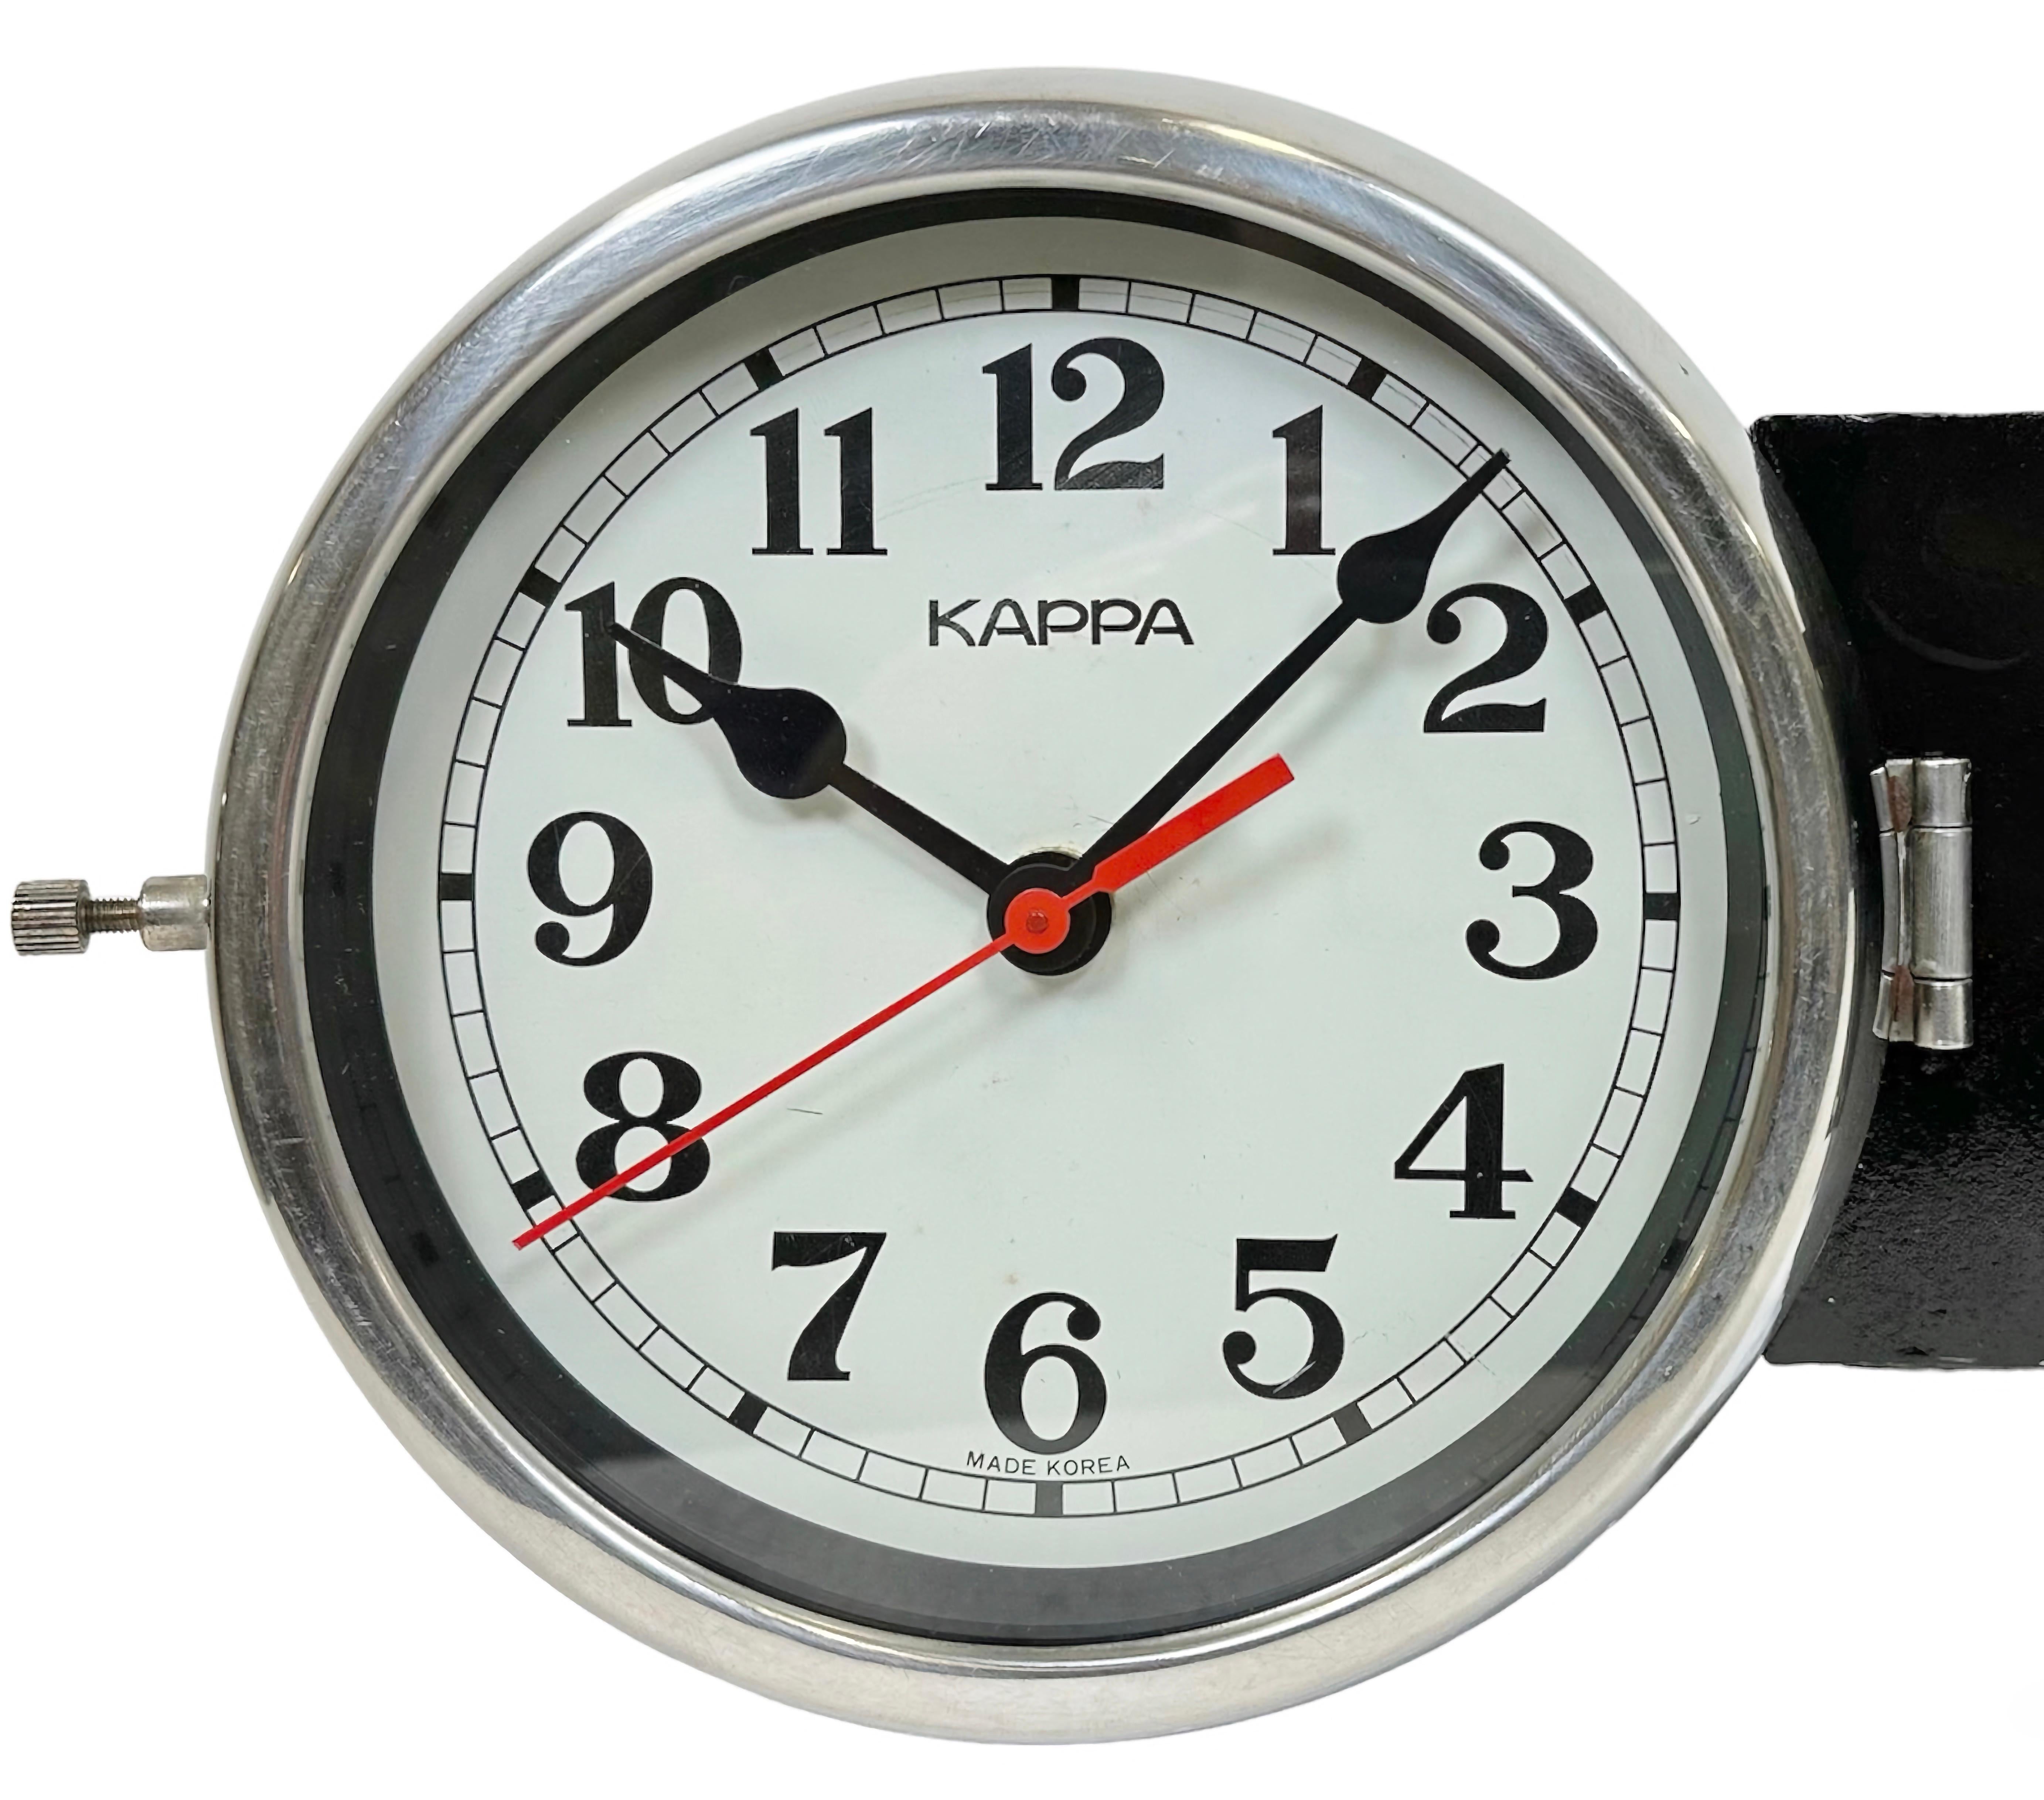 Vintage Industrial Kappa navy slave clock designed during the 1980s in South Korea. These clocks were used on large tankers and cargo ships. It features a black metal body, a metal dials and a clear glass covers with chrome frames. Former slave